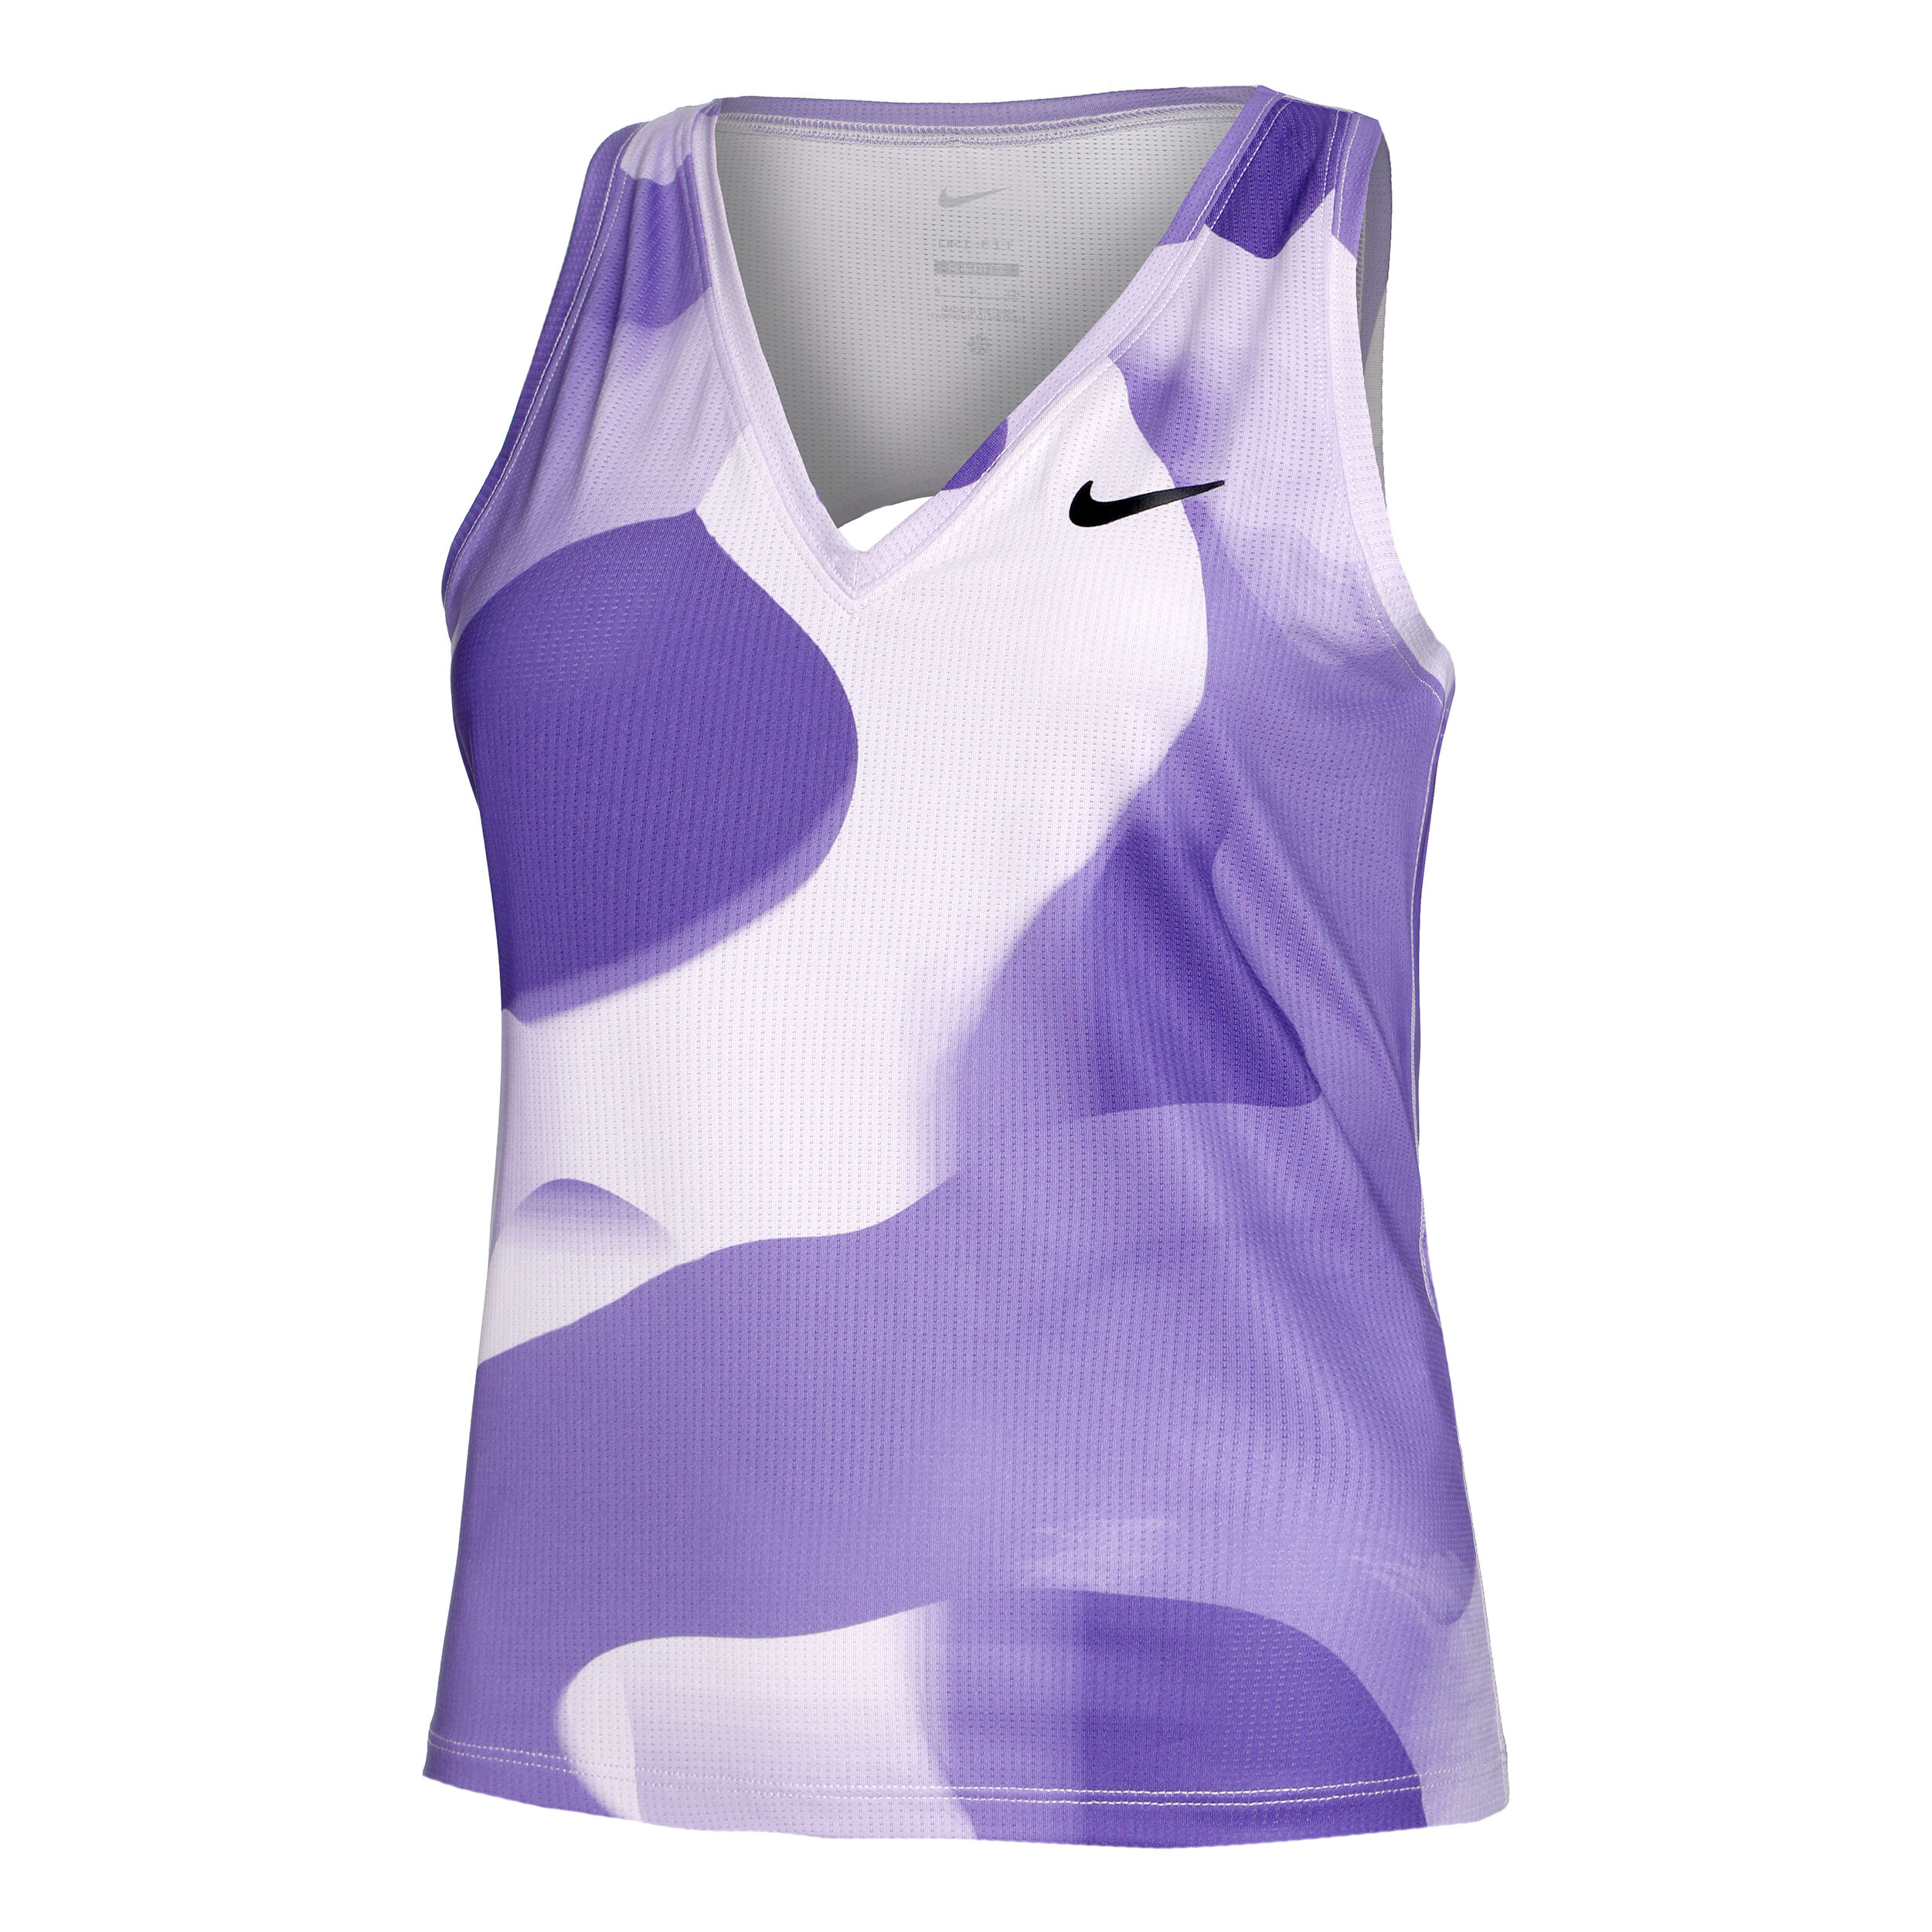 Court Victory Dri-Fit Printed Tank Top Women - Violet